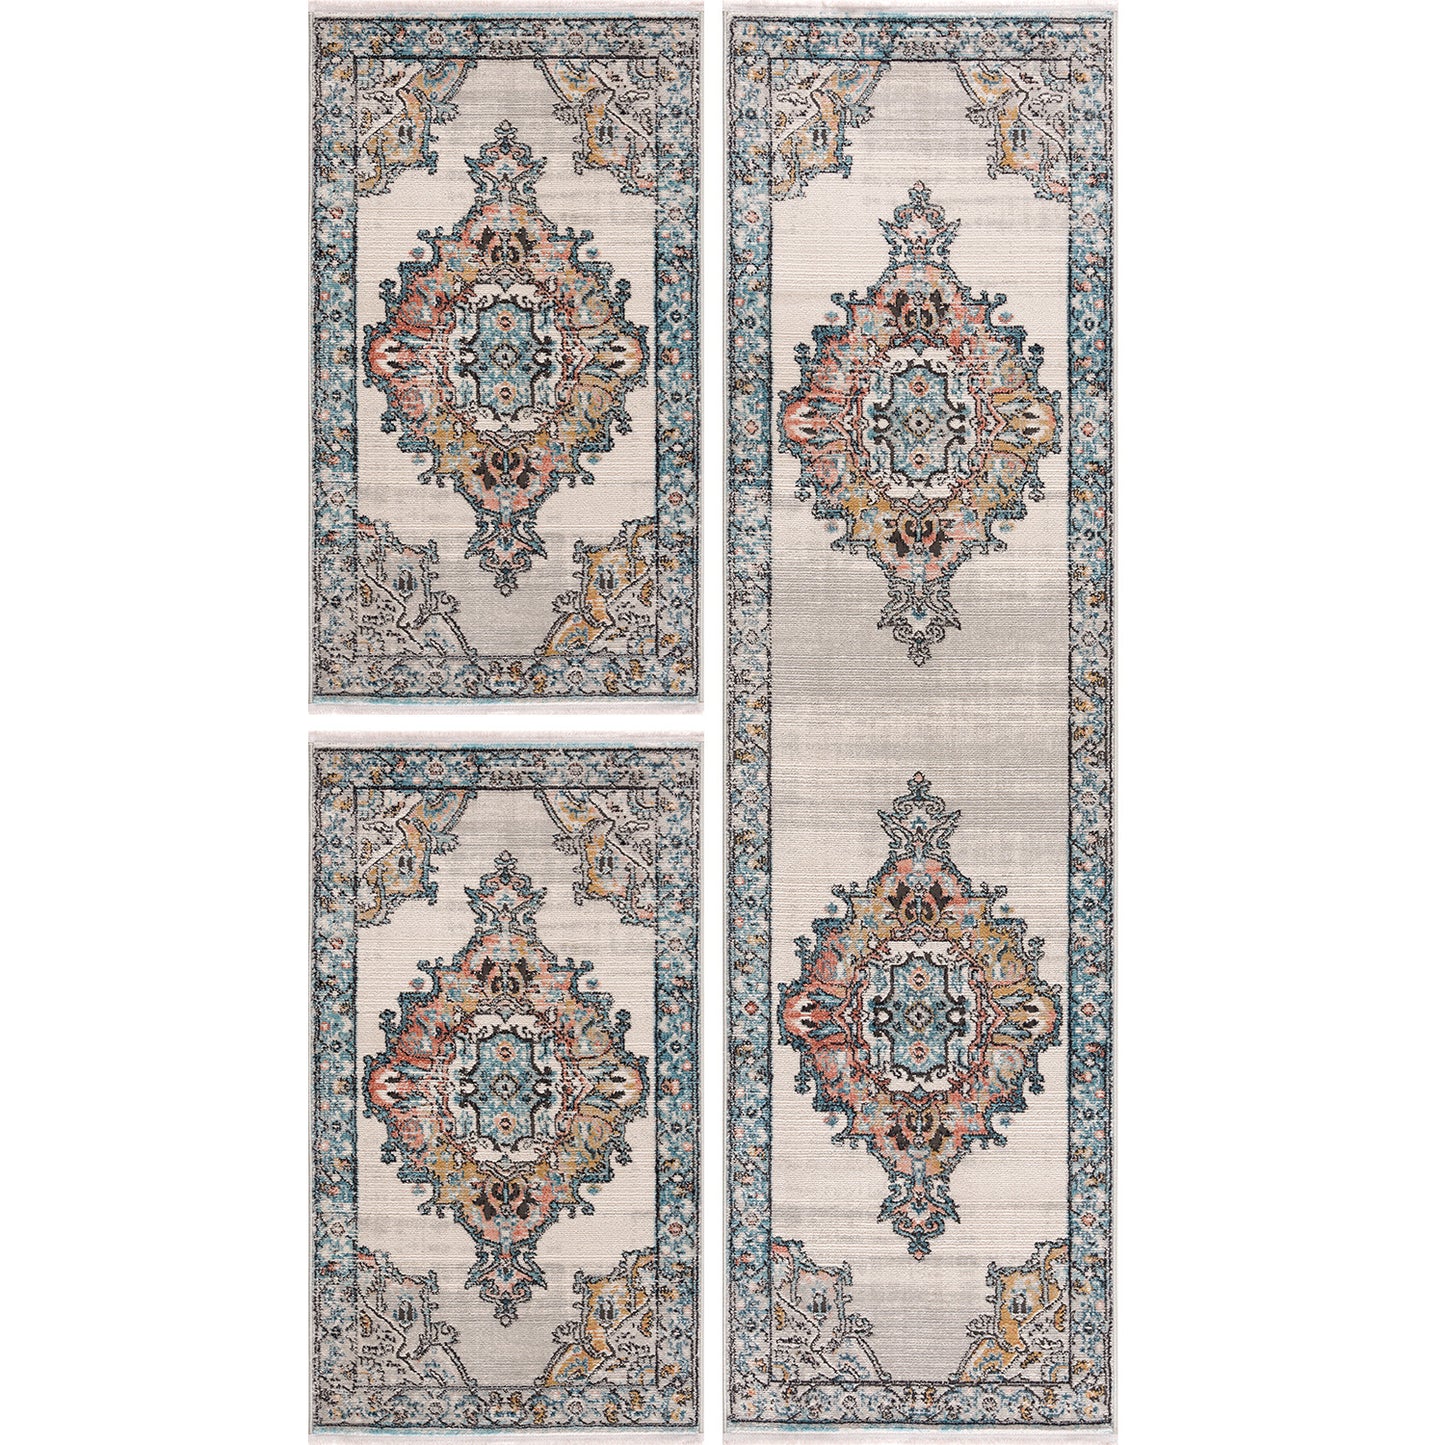 la dole rugs traditional persian bordered ikat turquoise ivory red orange area rug 6x8, 6x9 ft Living Room, Bedroom, Dining Area, Kitchen Carpet